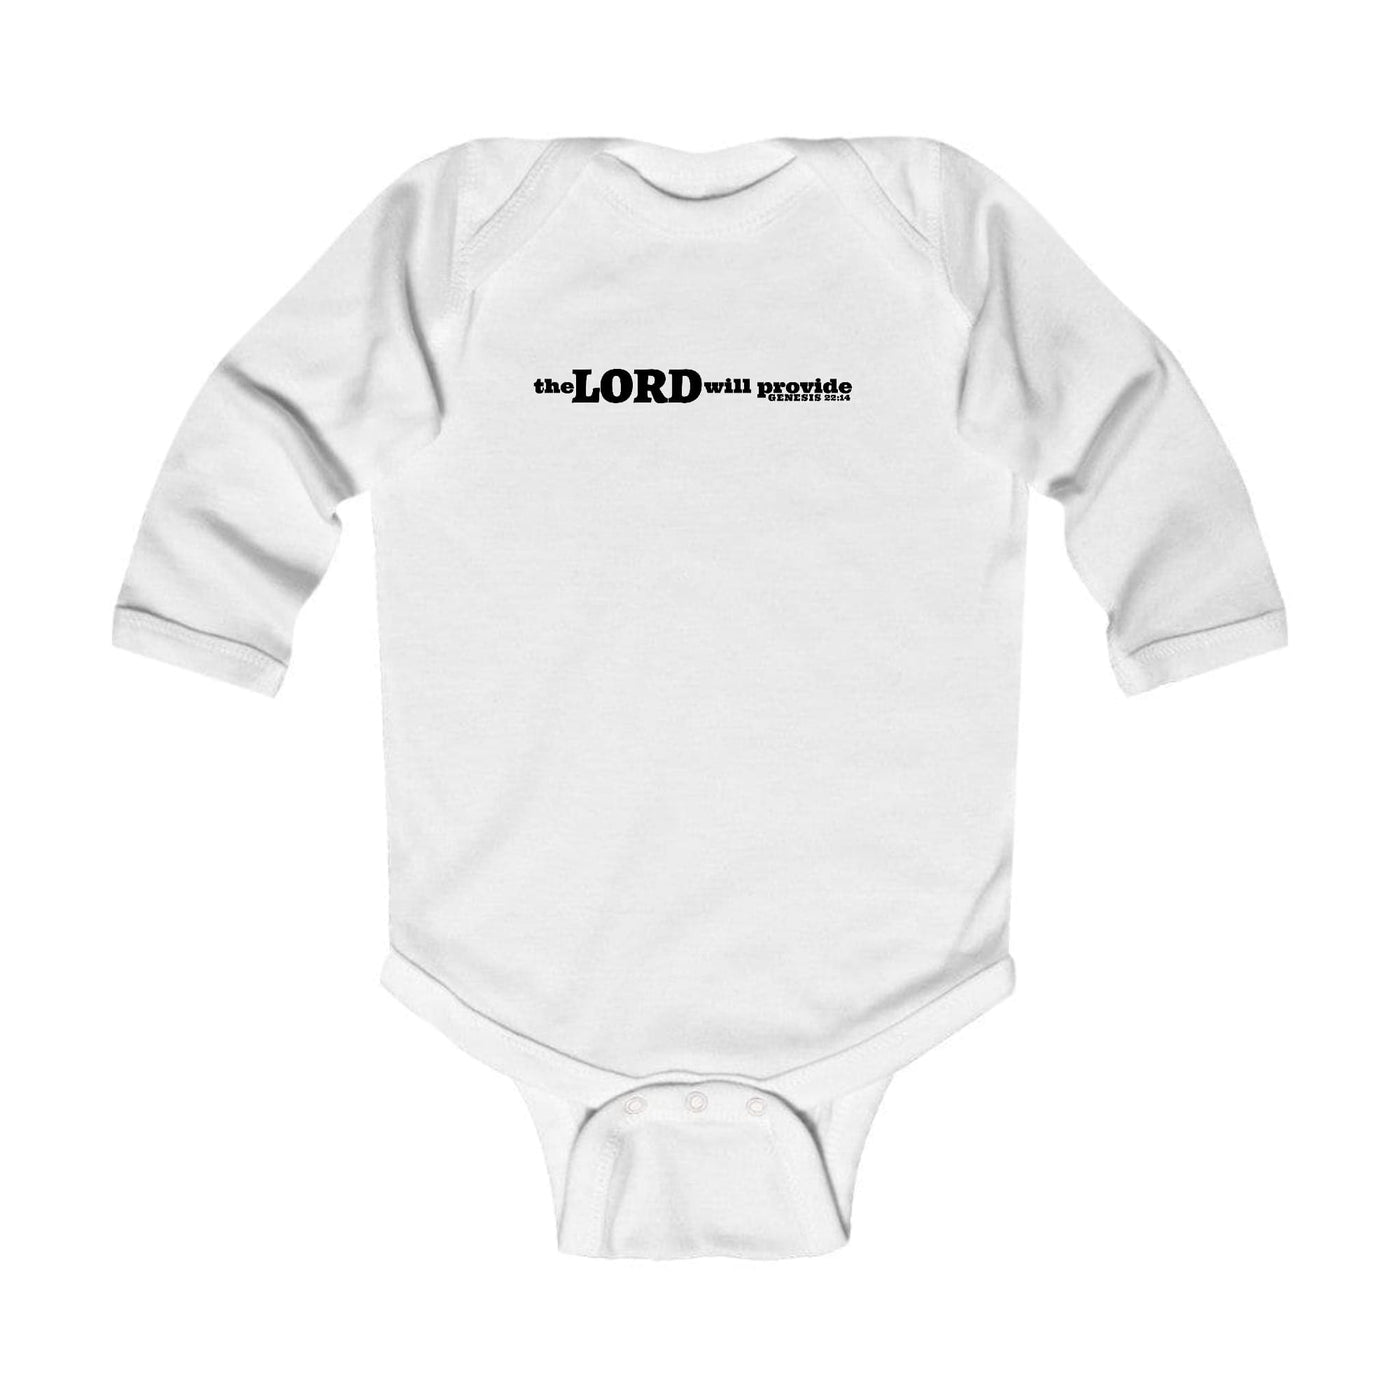 Infant Long Sleeve Graphic T-shirt The Lord Will Provide Print - Childrens